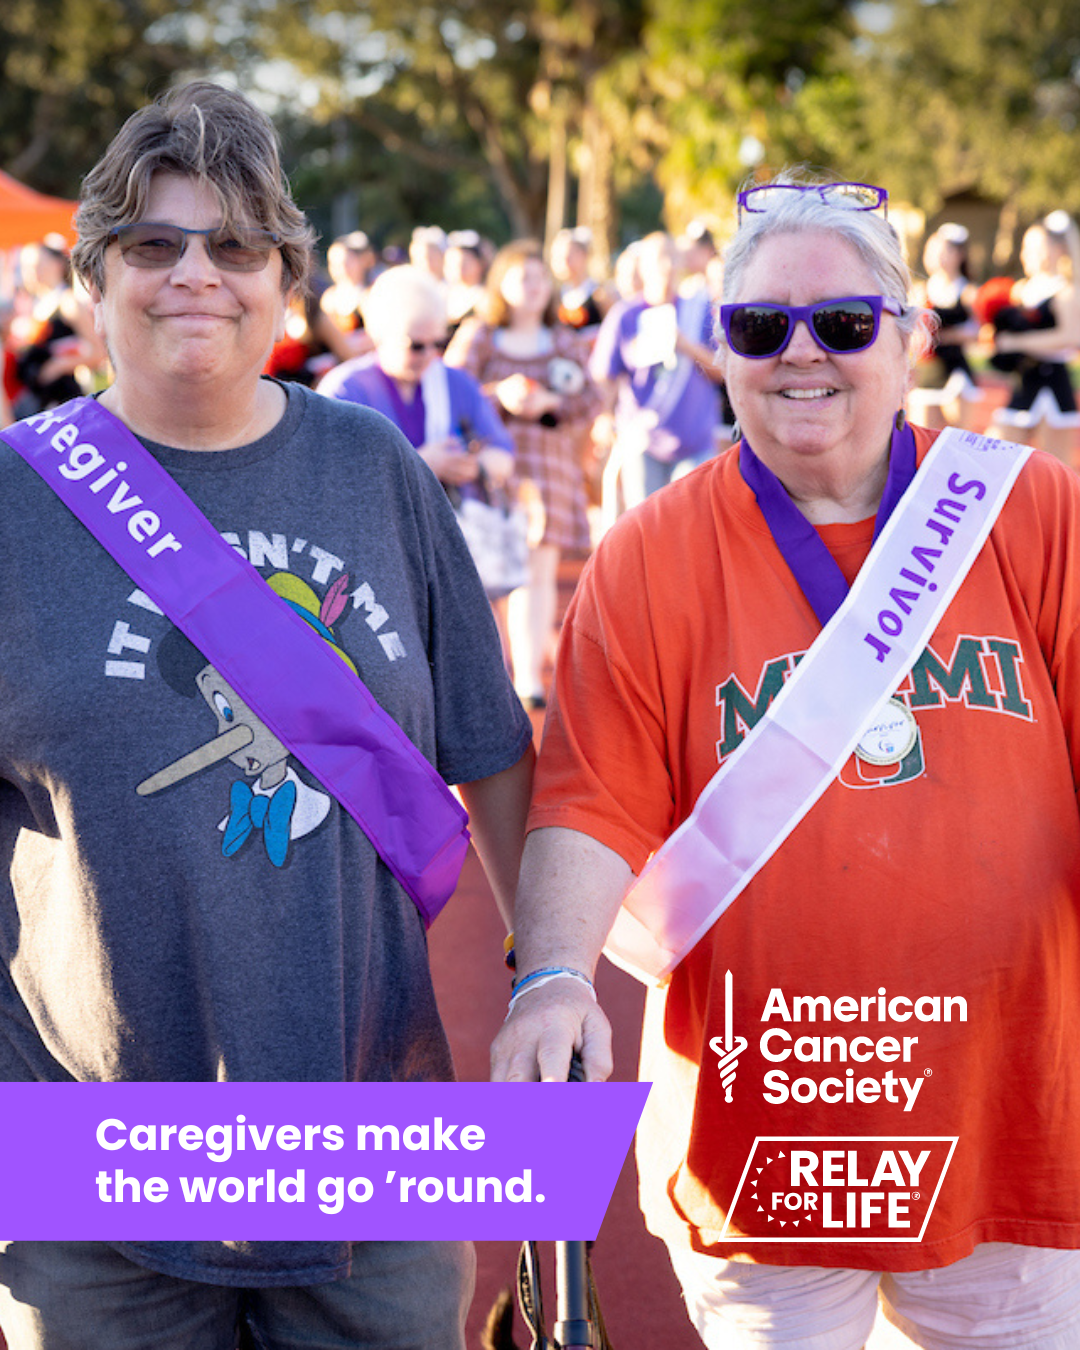 Help us celebrate the caregivers who offer

their support every single day. Sign up at
RelayForLife.org/EVENTNAME to help end cancer as

we know it, for everyone. #RelayForLifeEVENTNAME